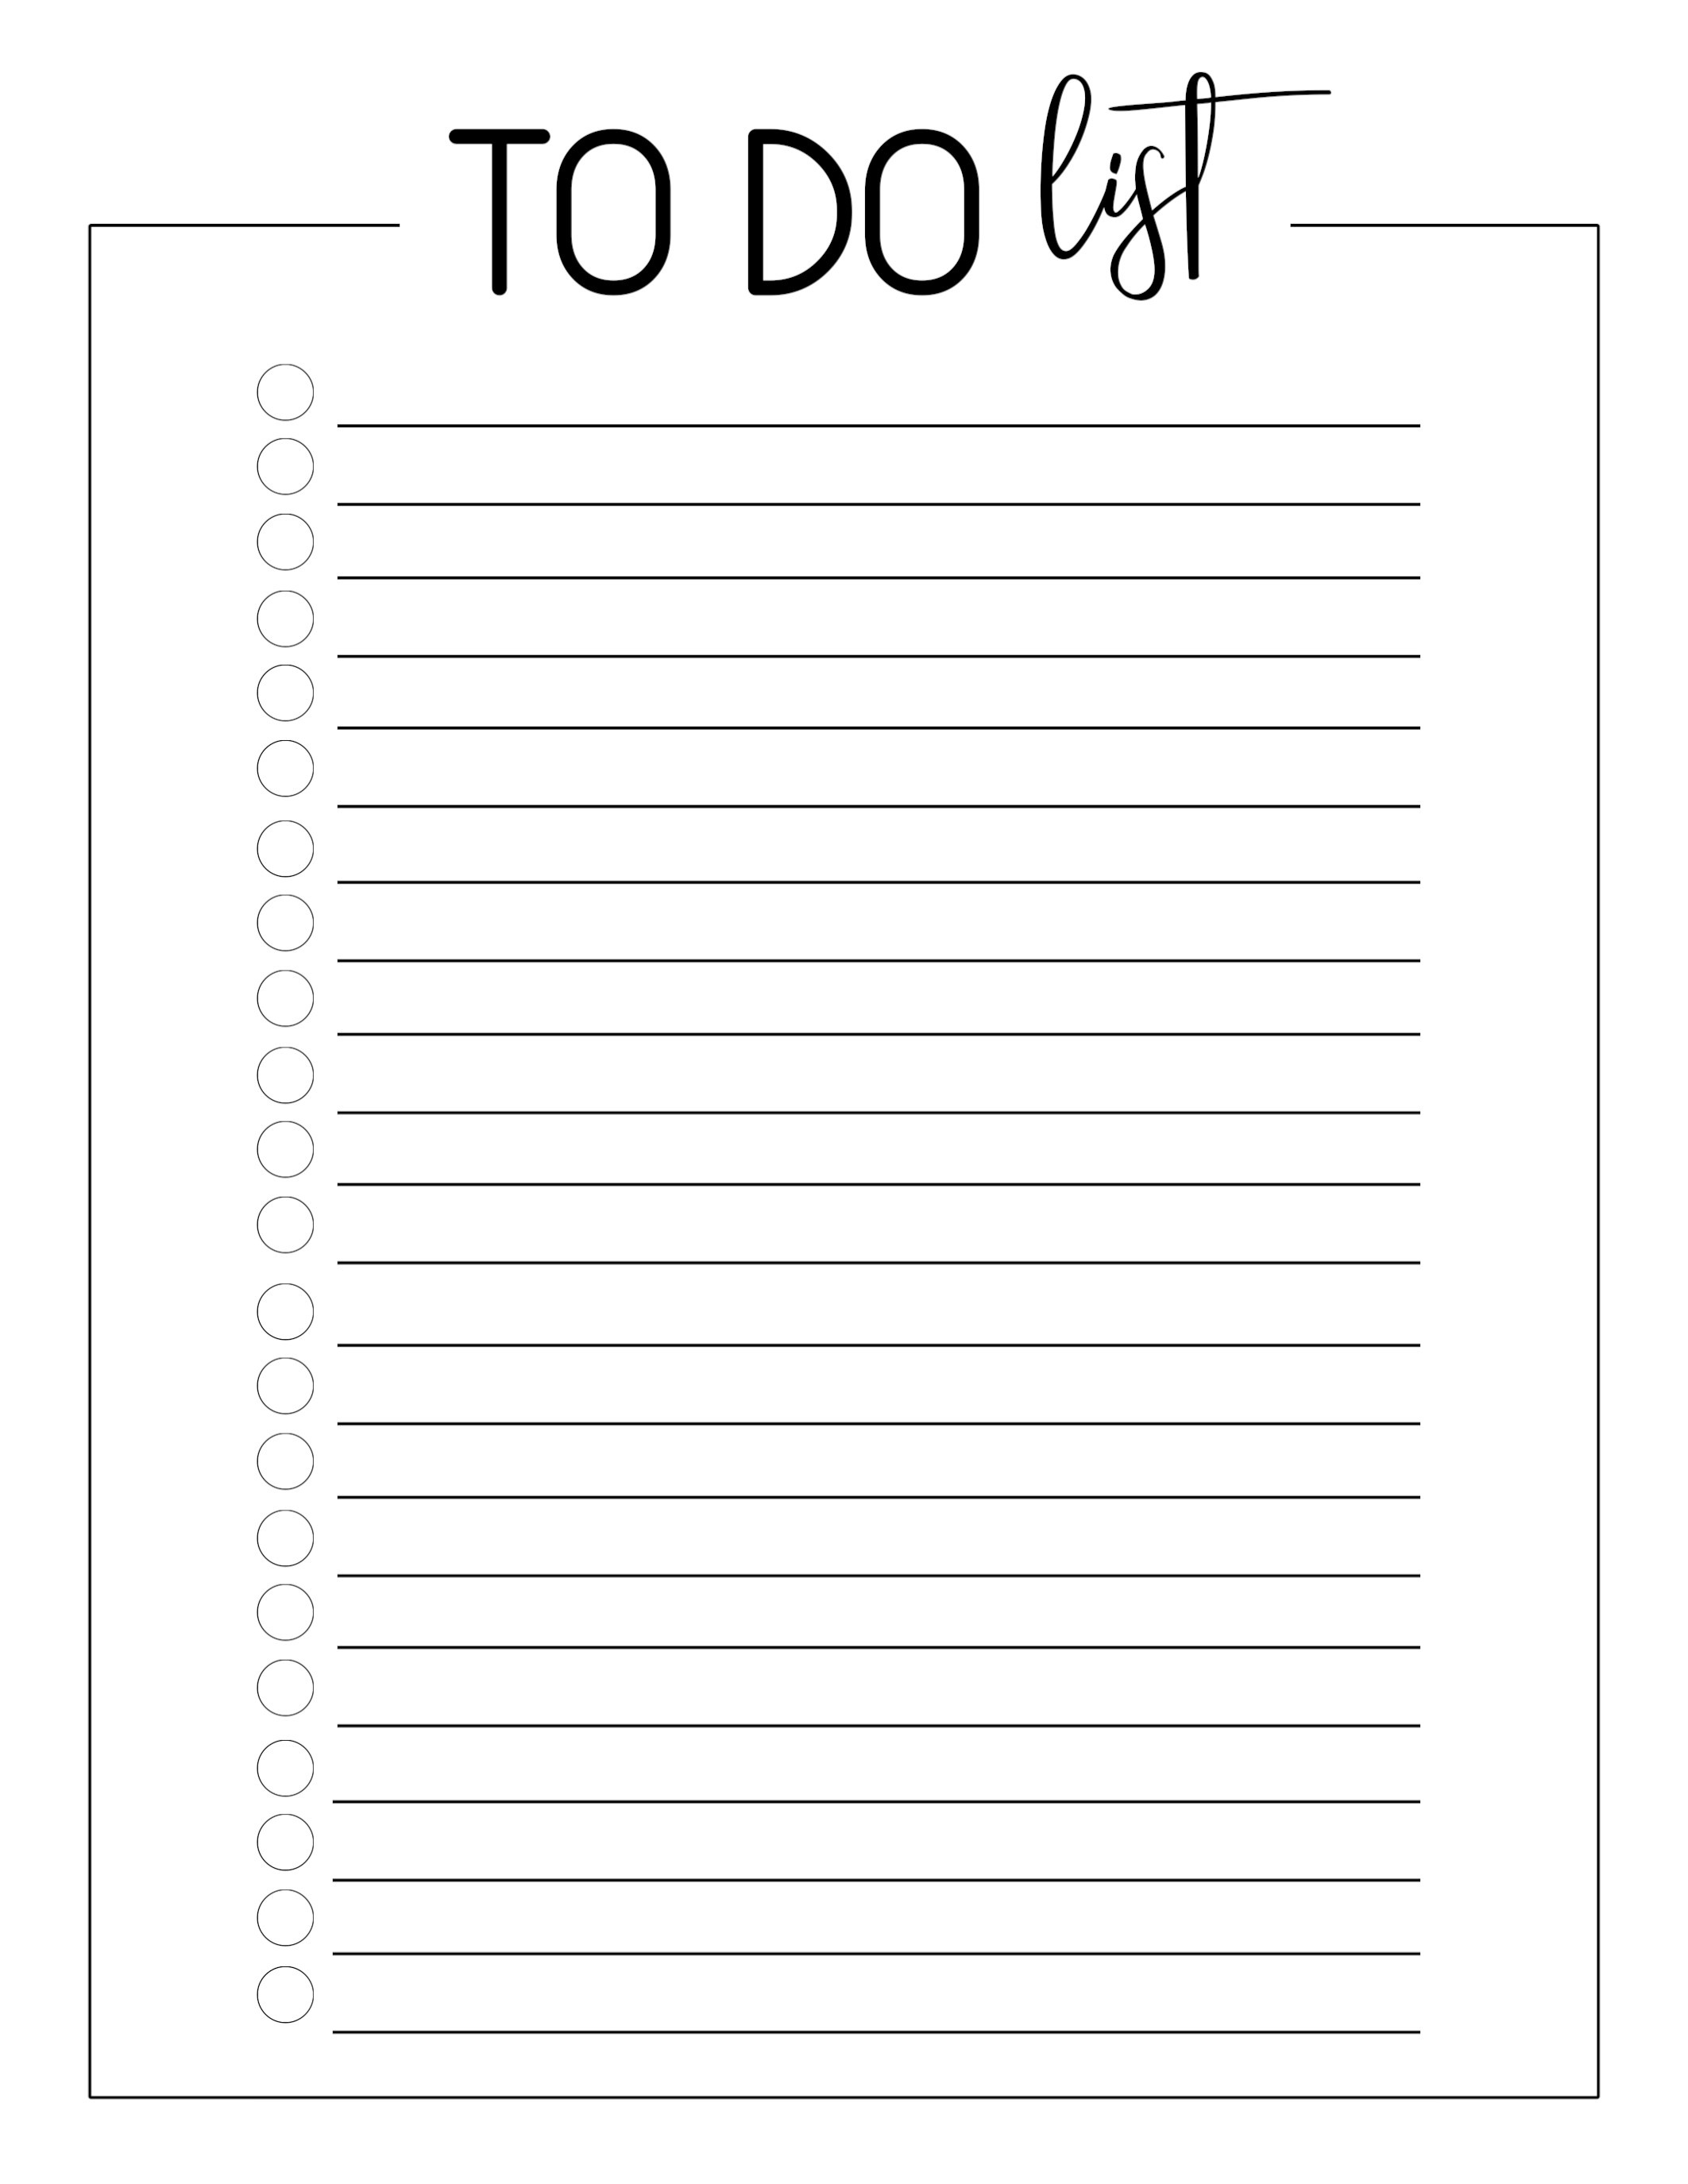 Free Printable To Do Checklist Template - Paper Trail Design - Free Printable To Do List